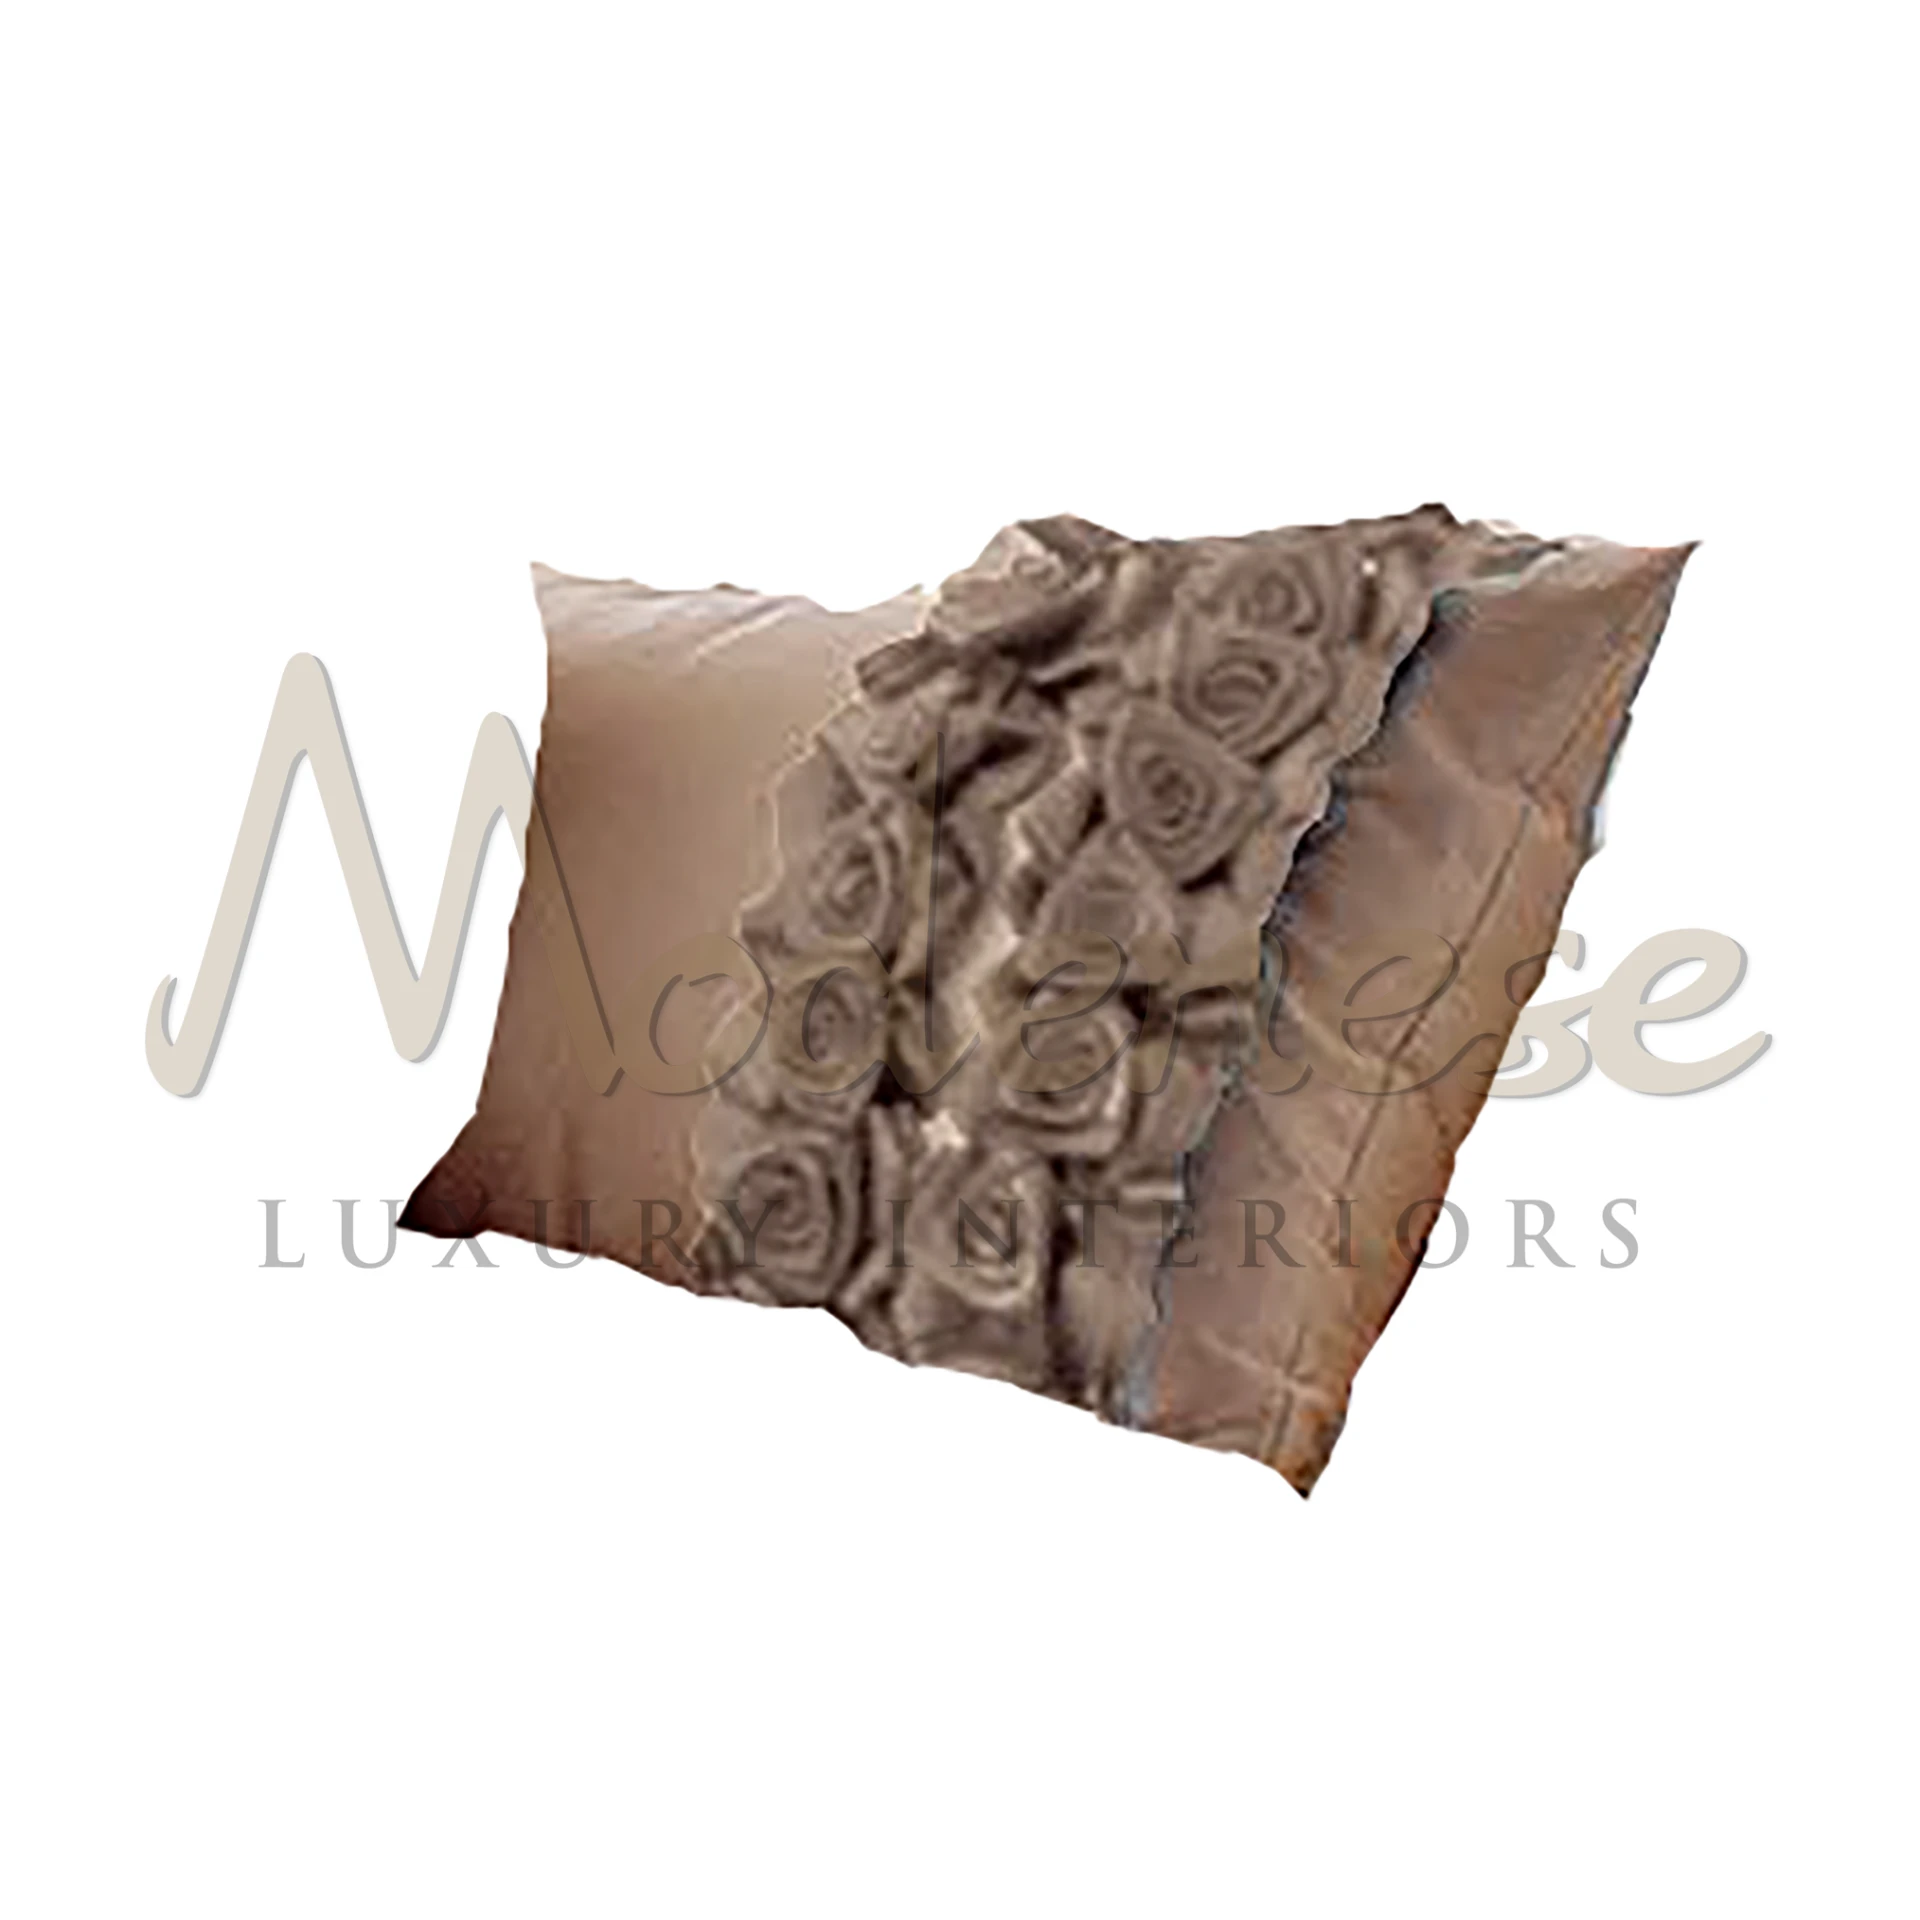 Victorian Beige Pillow with meticulous craftsmanship and delicate embellishments, showcasing Italian luxury textiles.